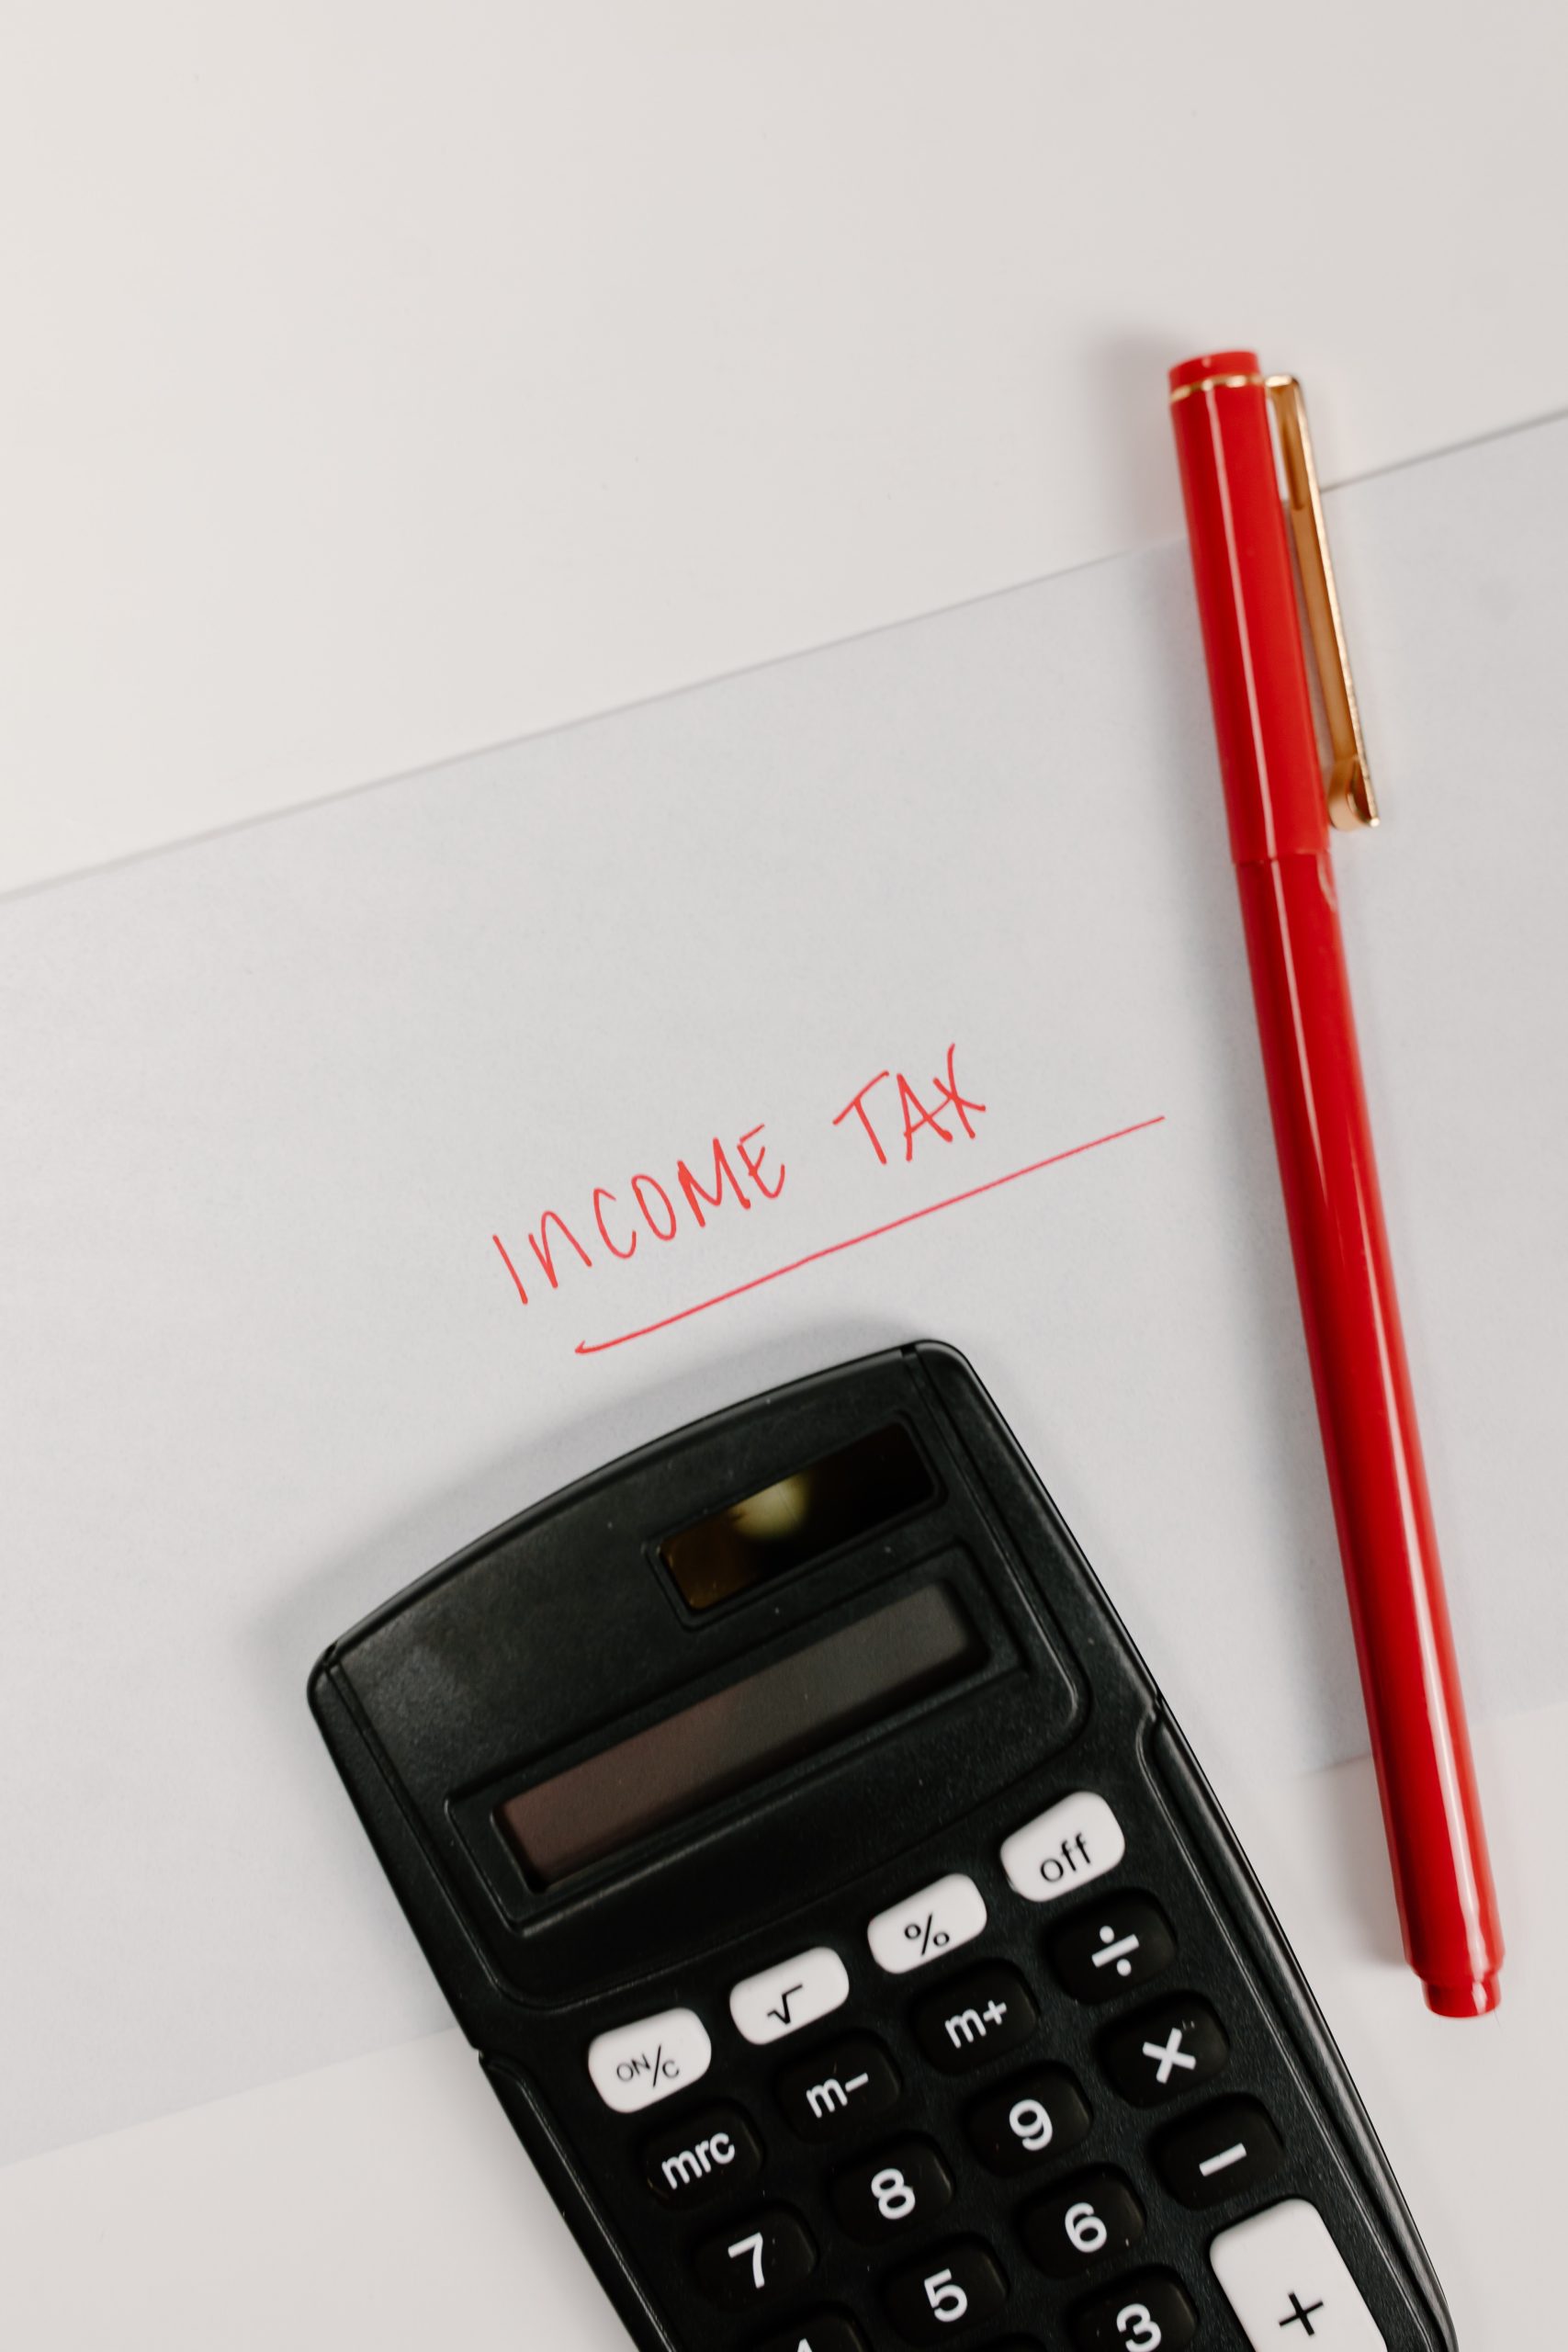 In the picture, there is a pen, Calculator and work income tax